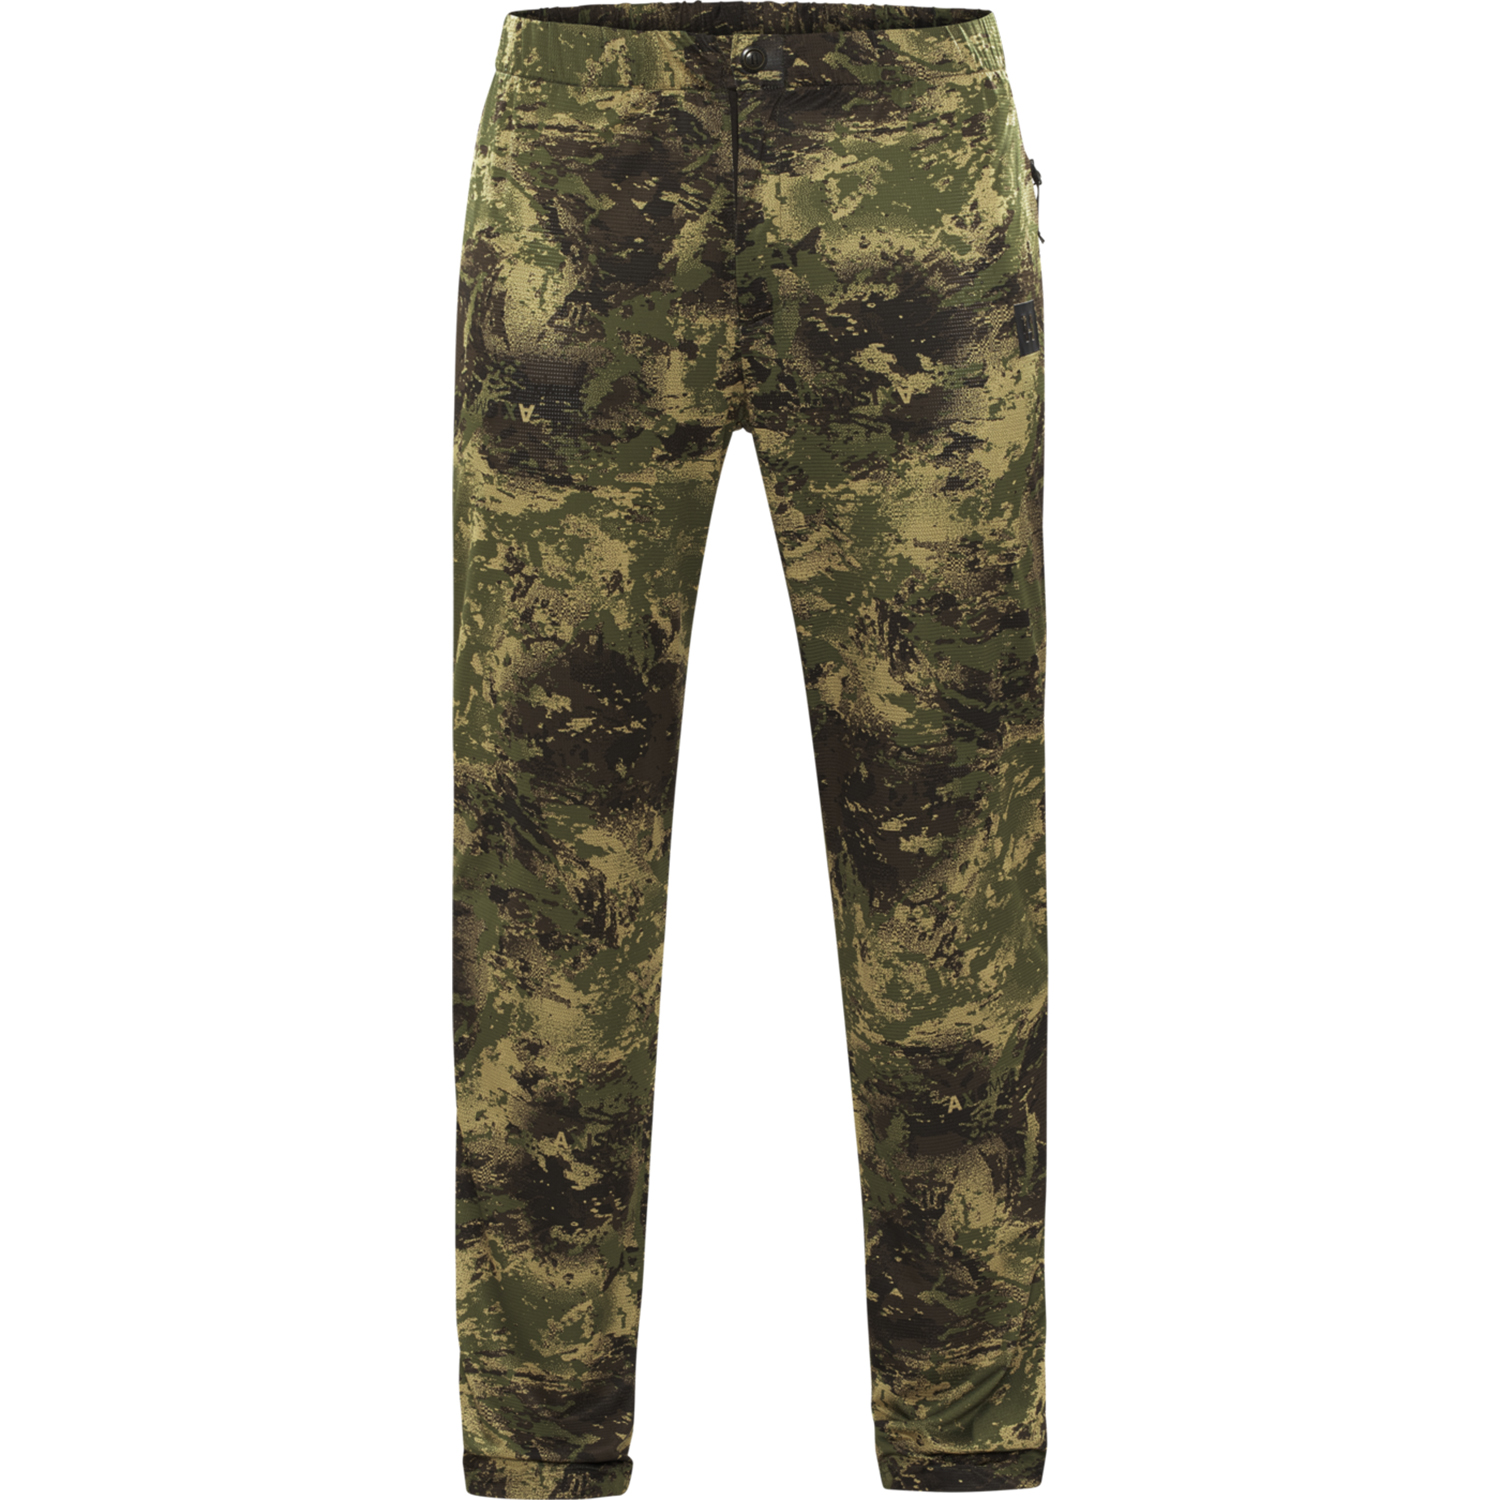 Härkila cover trousers deer stalker (AXIS MSP) - Insect Protection